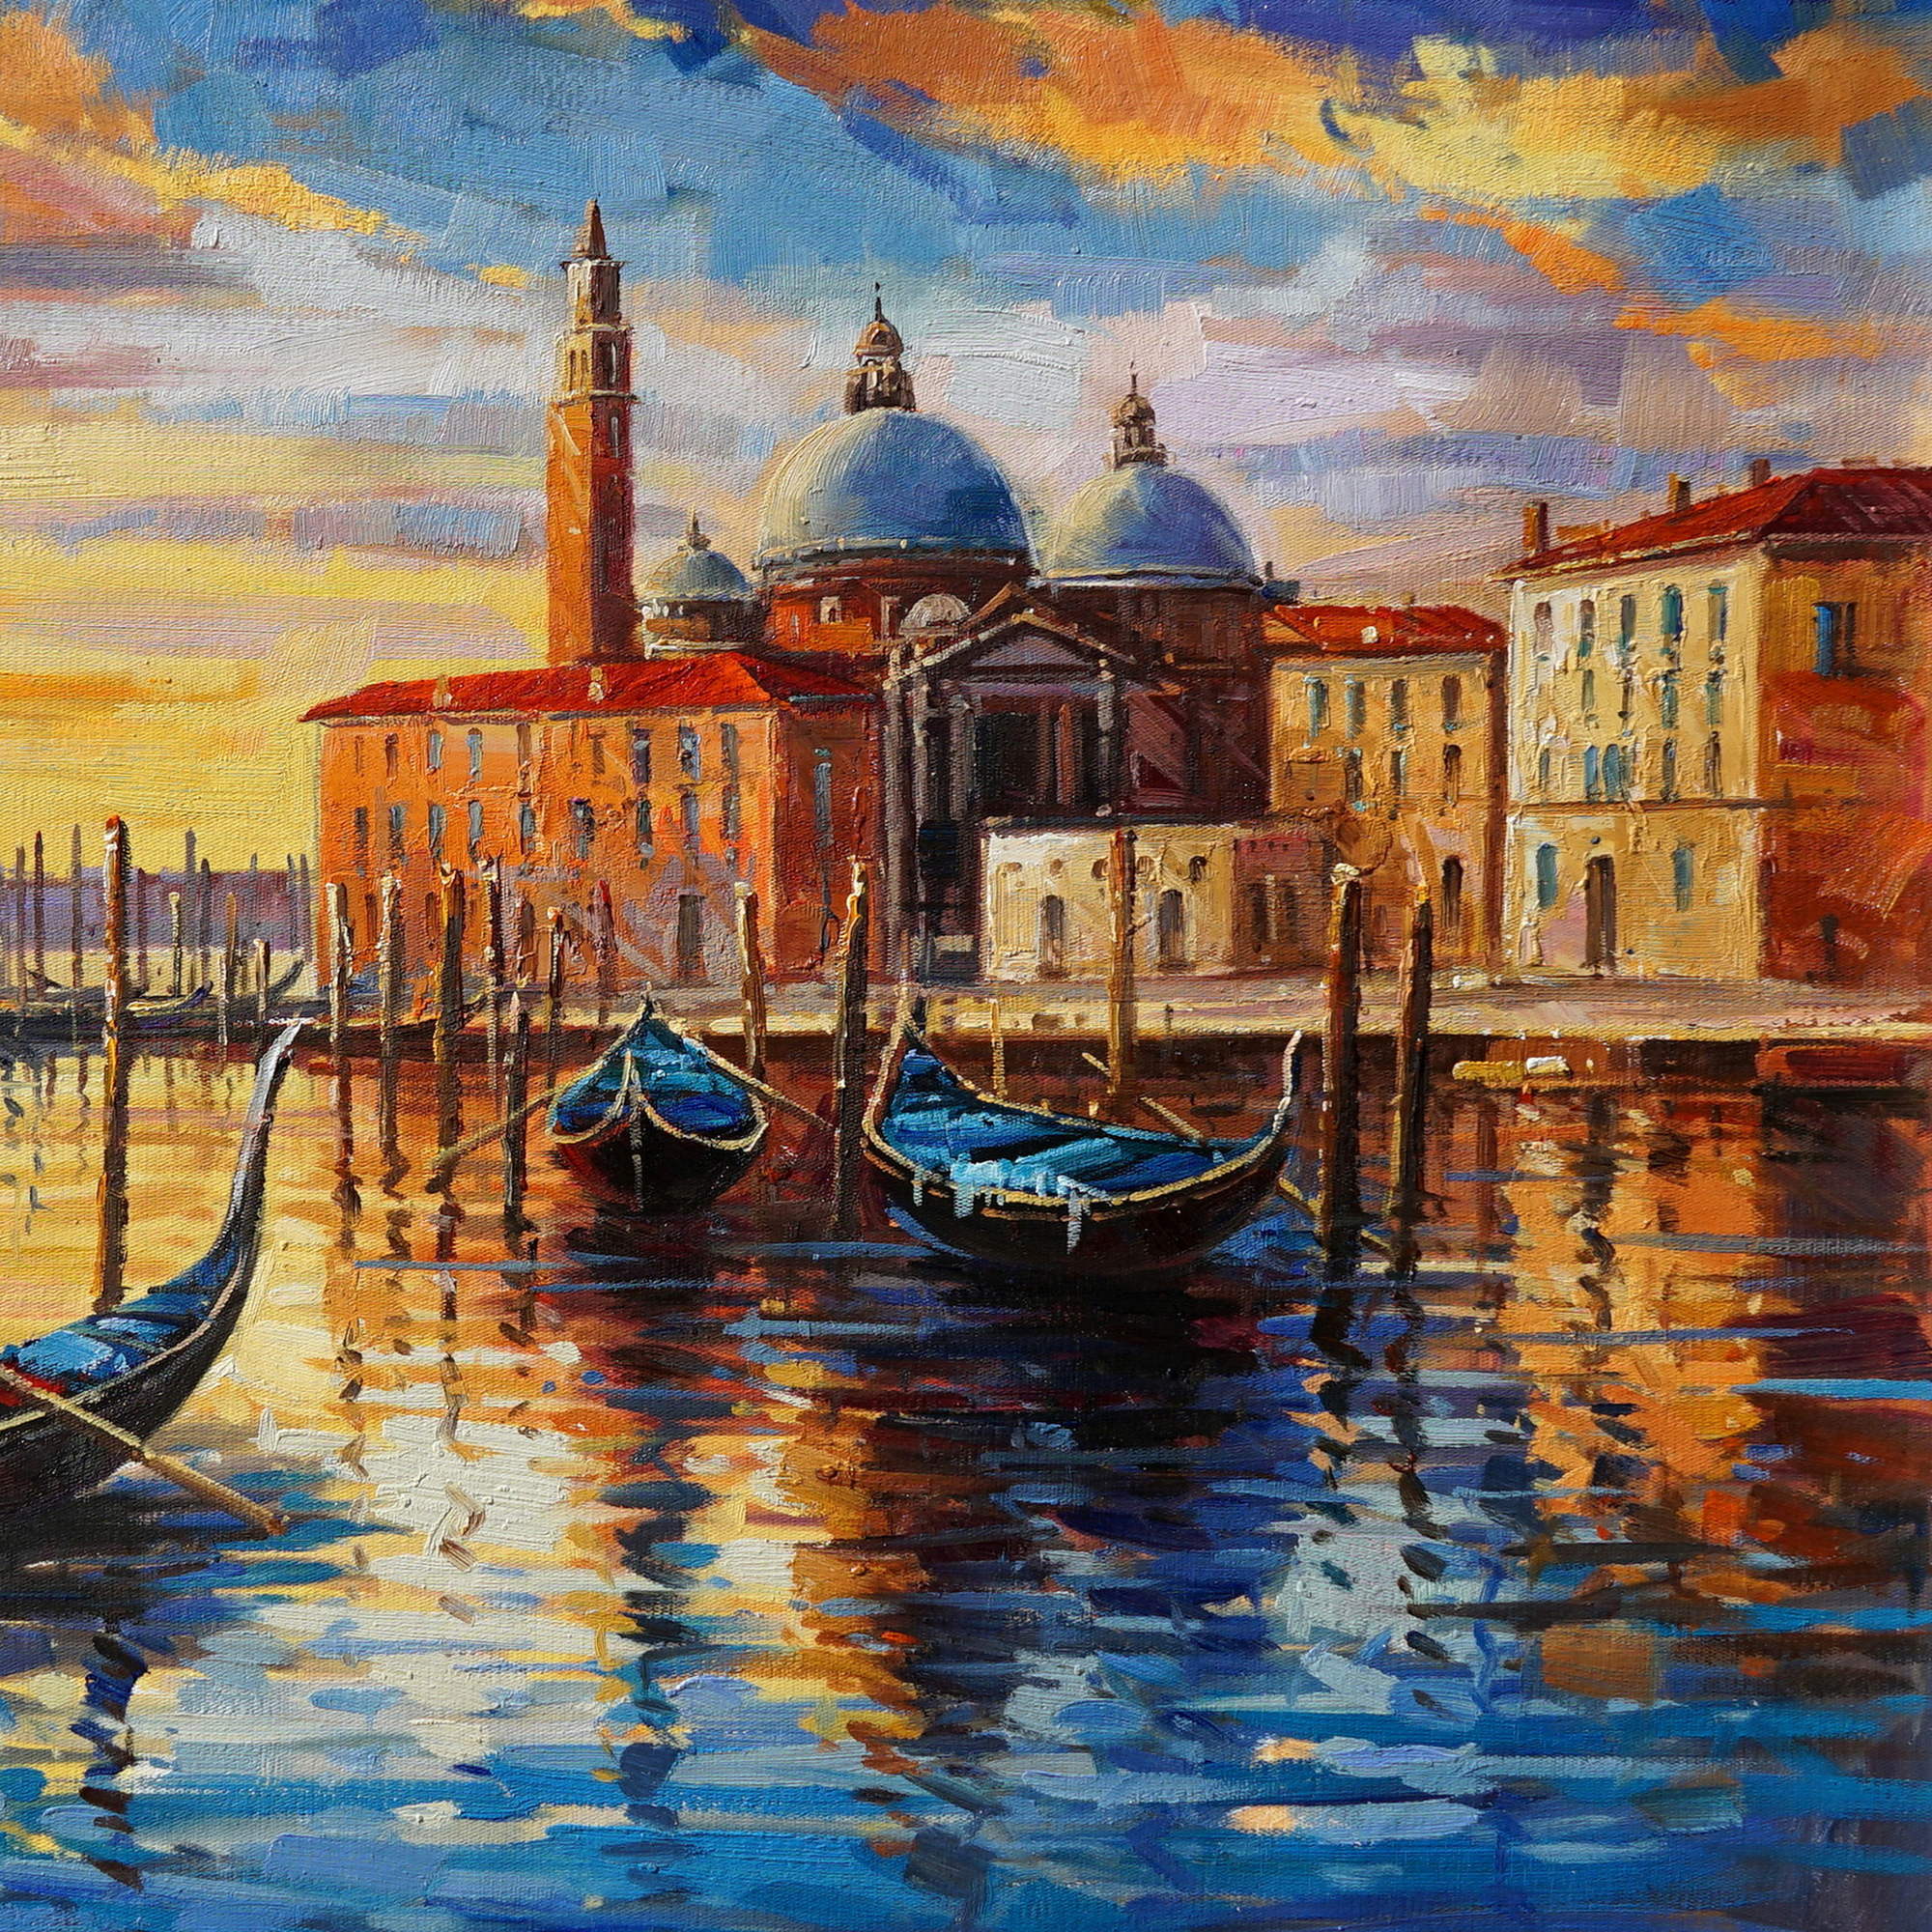 Hand painted Venice at sunset Canal Gondolas 75x100cm